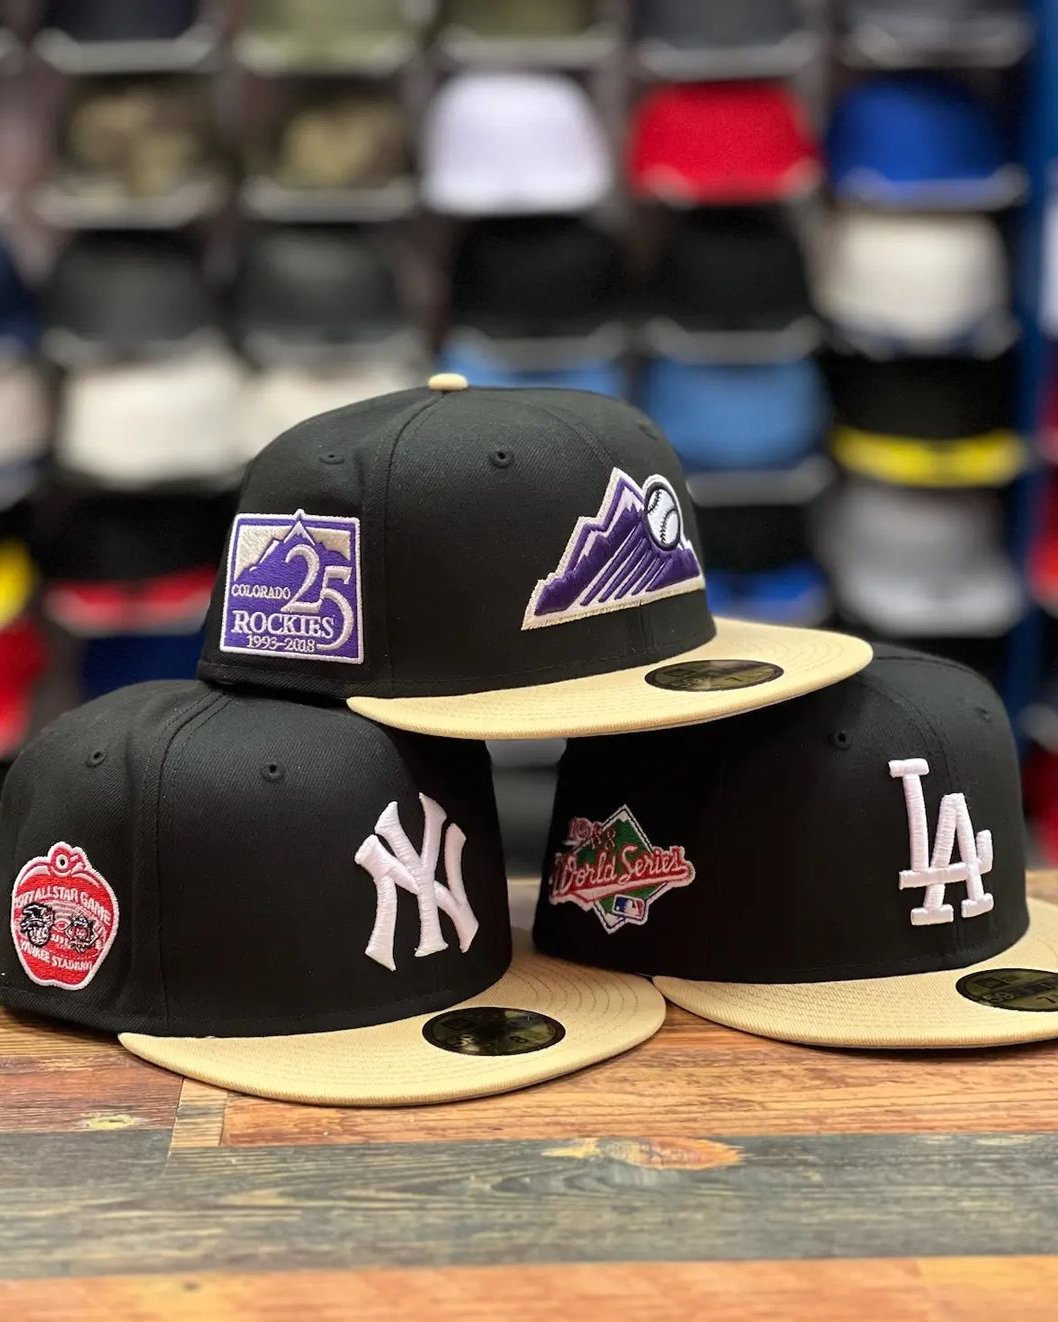 Lids on X: The New Era x MLB Vegas Night 59FIFTY has officially